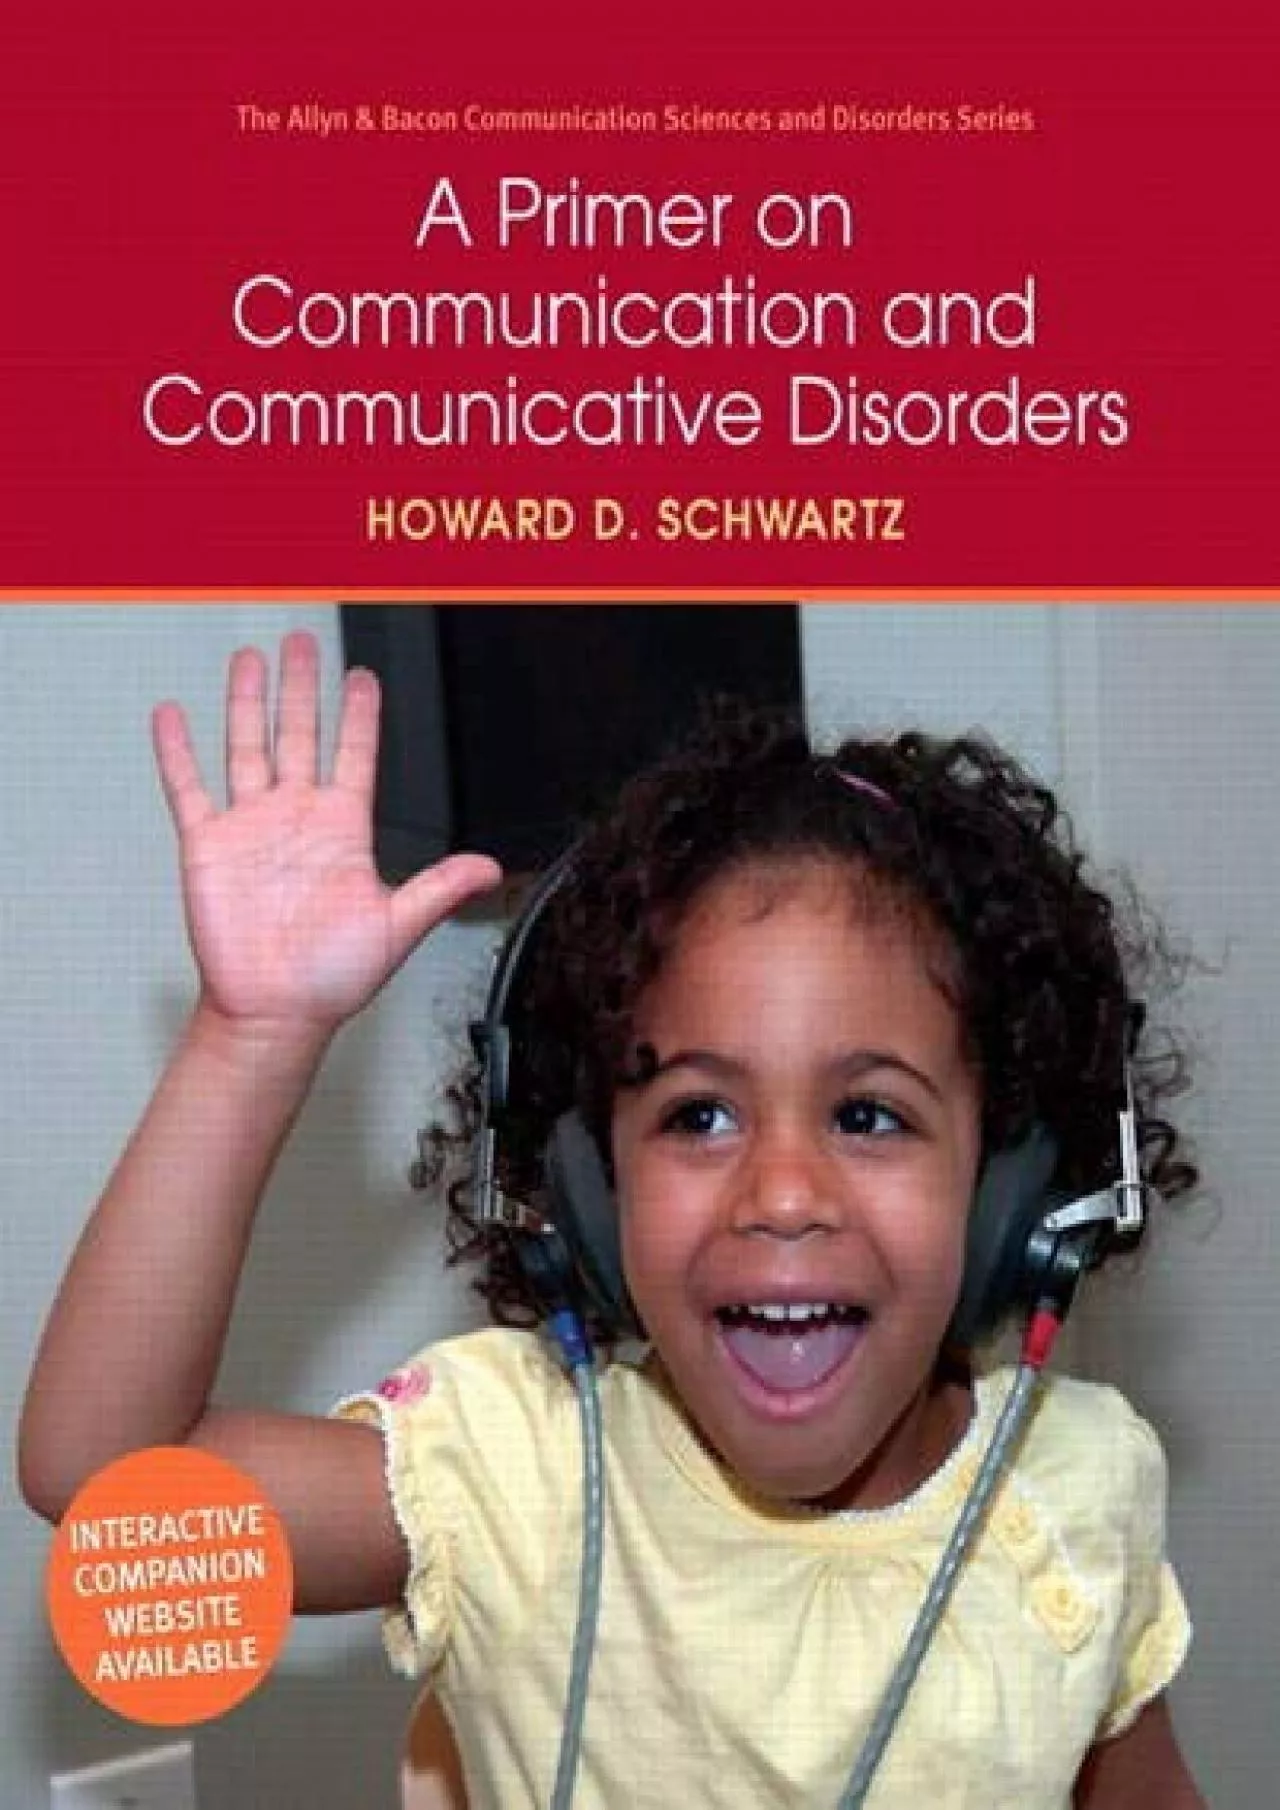 (BOOK)-A Primer on Communication and Communicative Disorders (Allyn & Bacon Communication